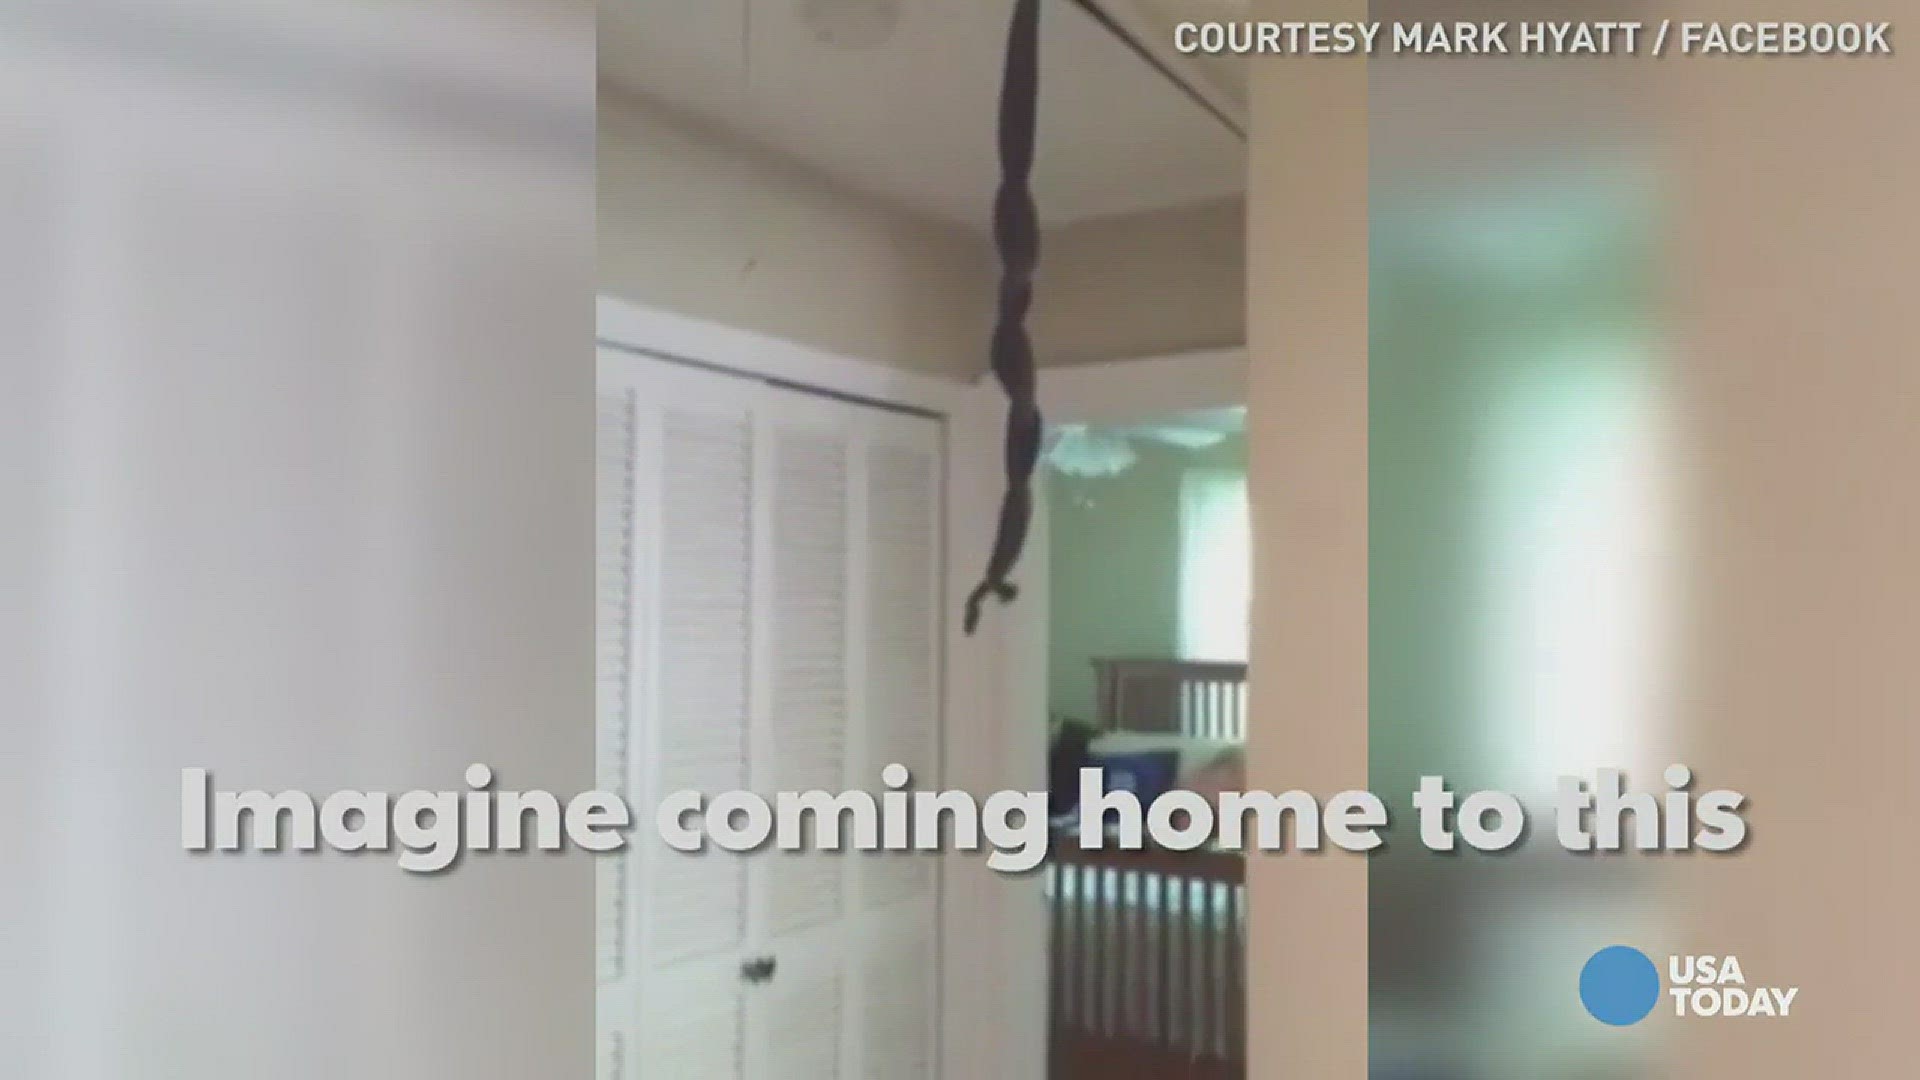 A South Carolina man found two snakes braided together and dangling from his attic door. He was able to chase one out of the house but says the other one may still be inside!